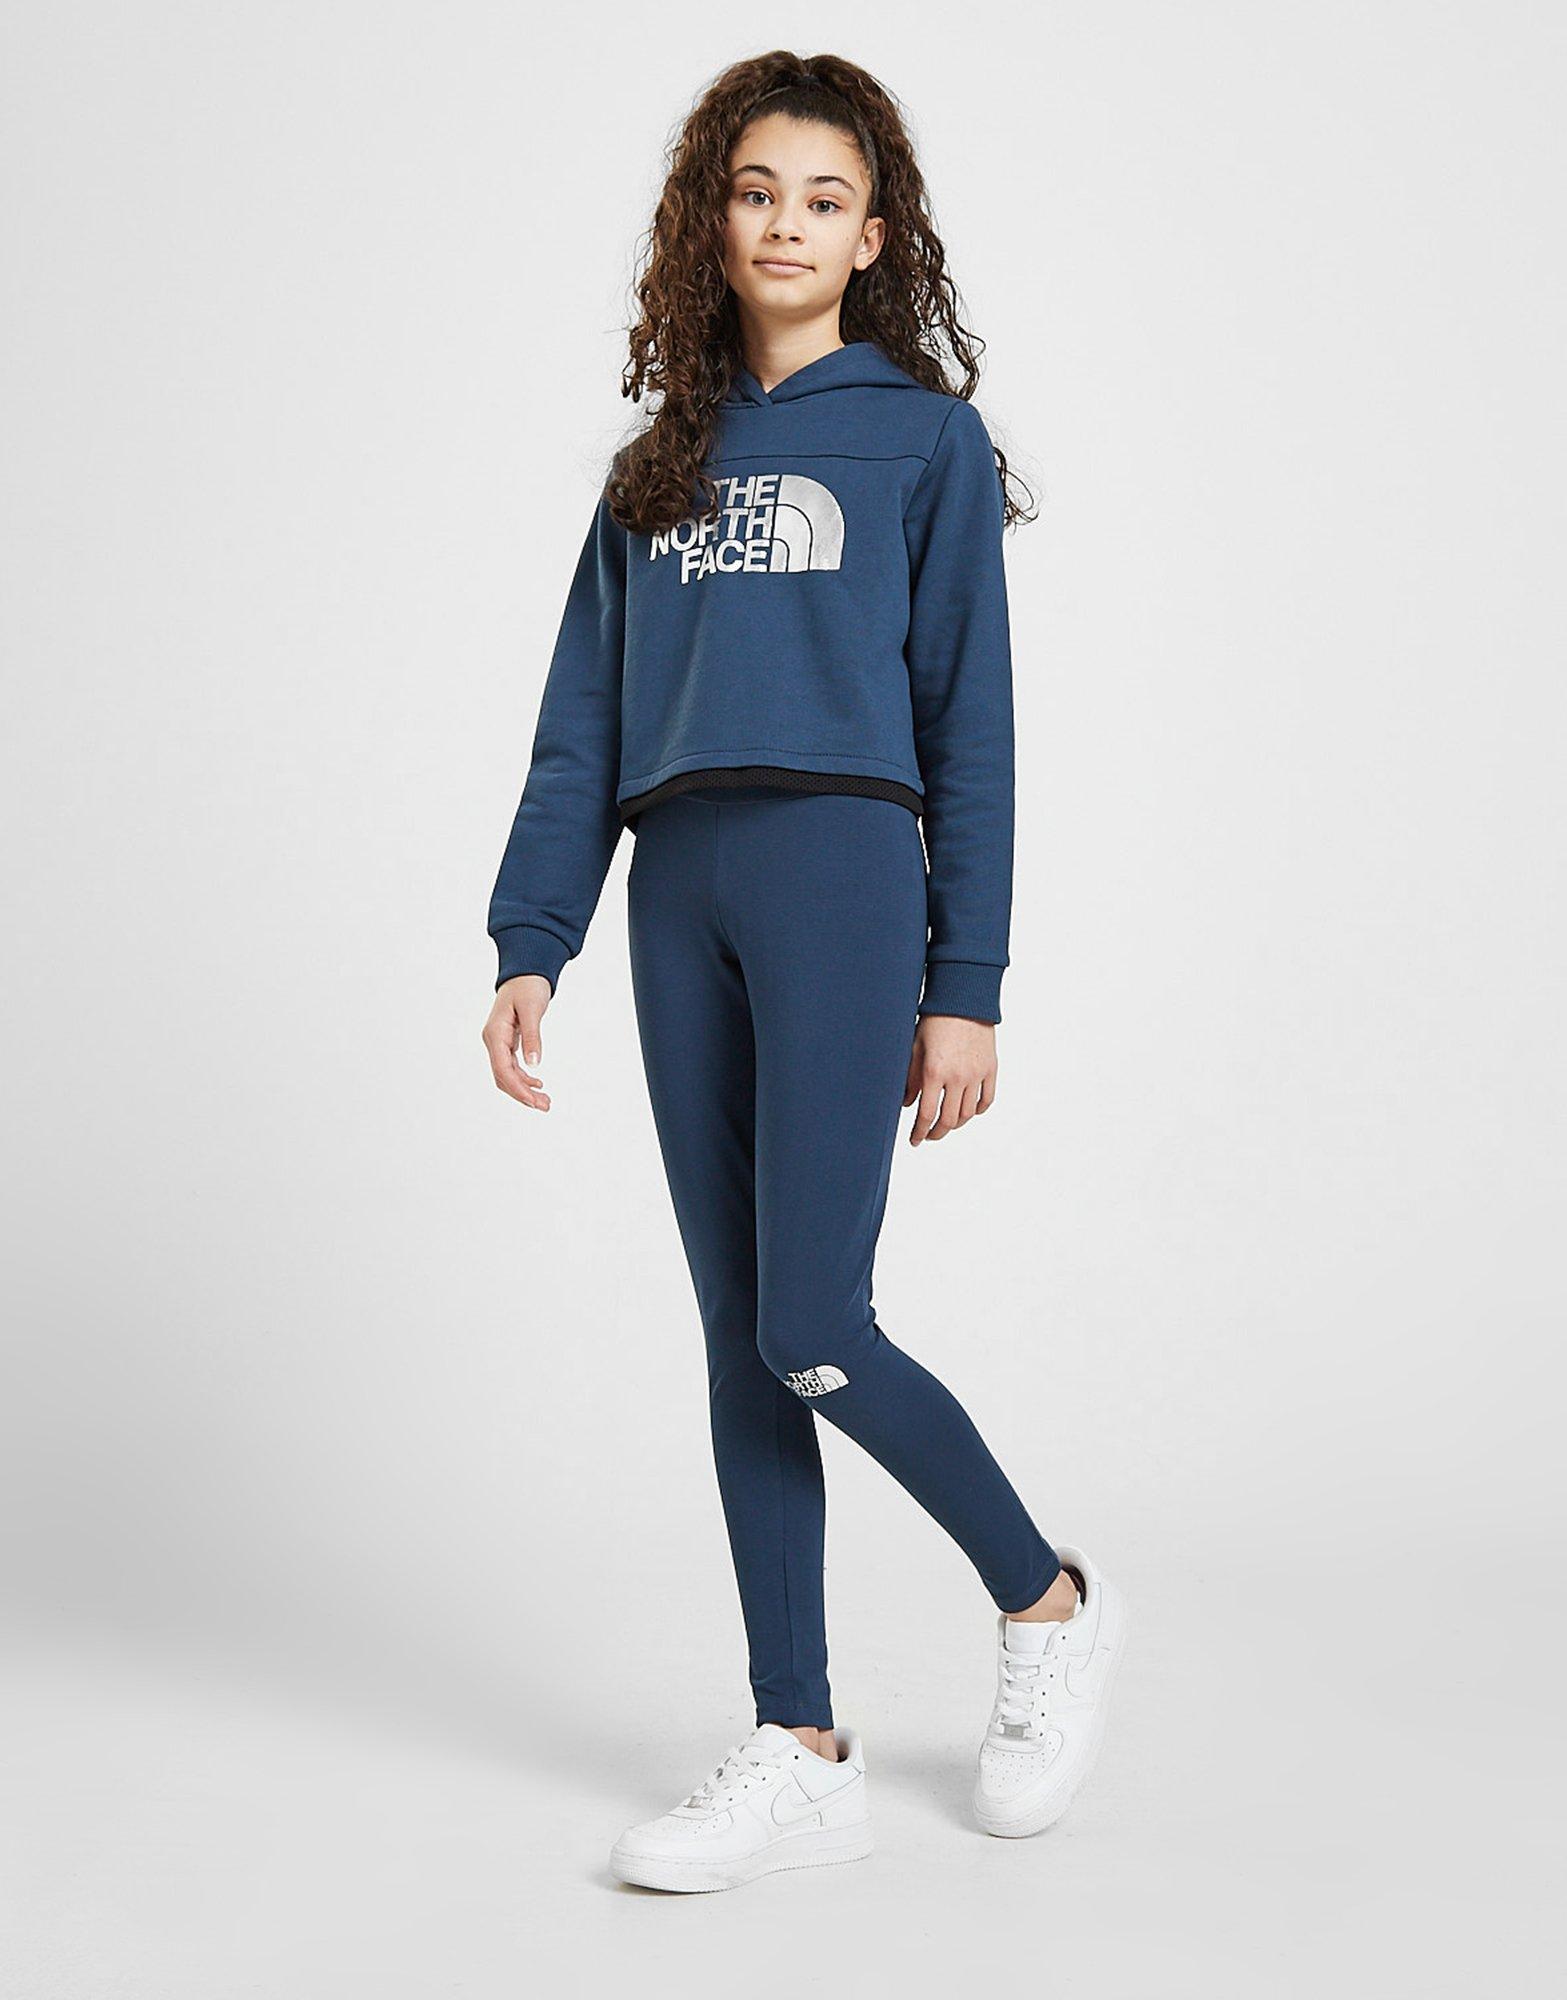 girls north face top